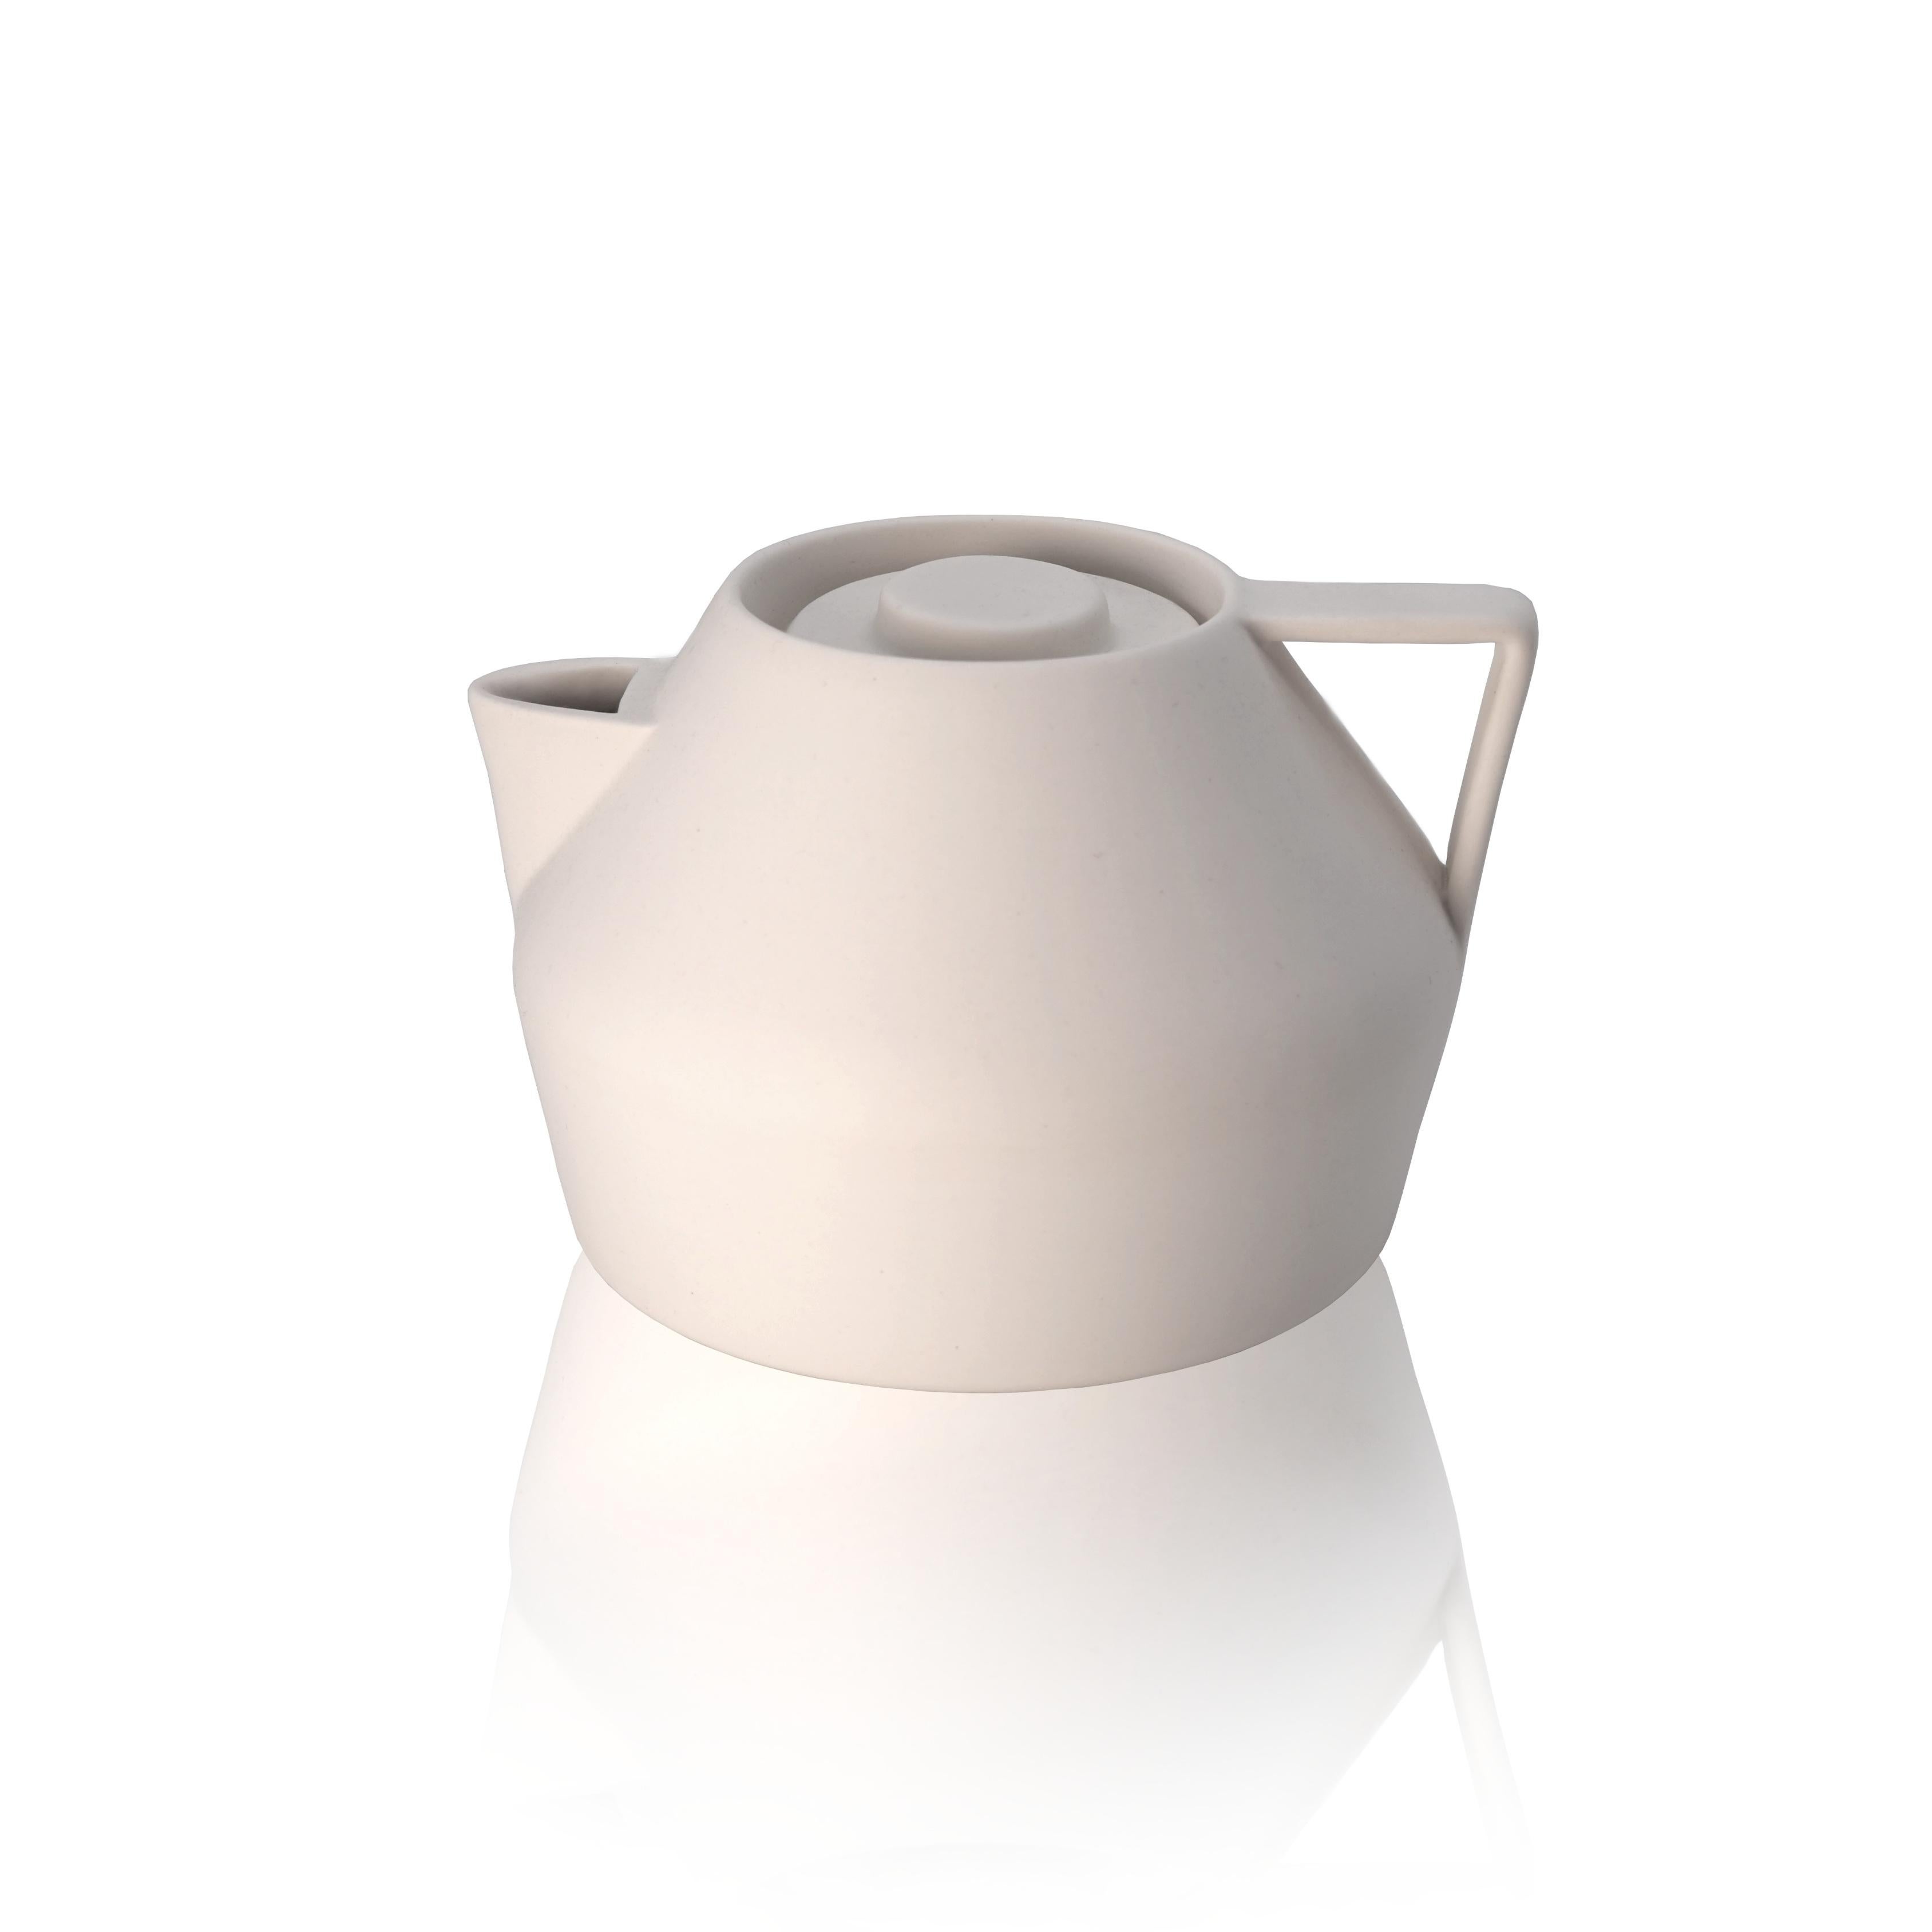 Mum is a porcelain teapot with smooth geometric lines, and is natural to the touch. The CAP disappears on the top, and the profile retains its essential design. Porcelain teapot, matte finish.
Minimal variations in shape, size and color are to be